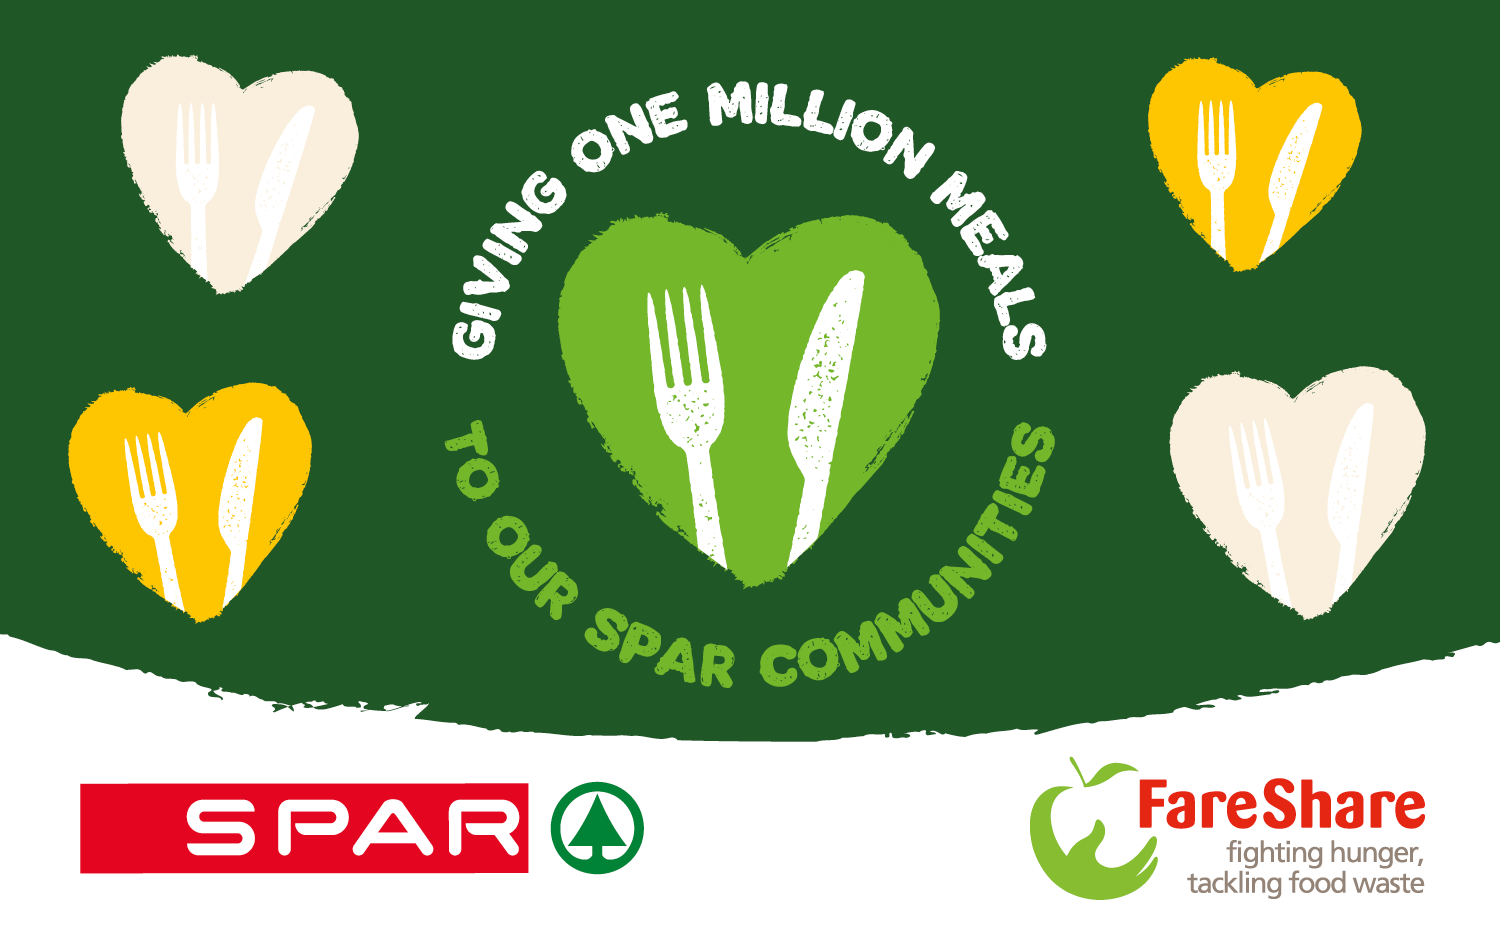 SPAR partners with FareShare to launch their first Giving One Million Meals campaign